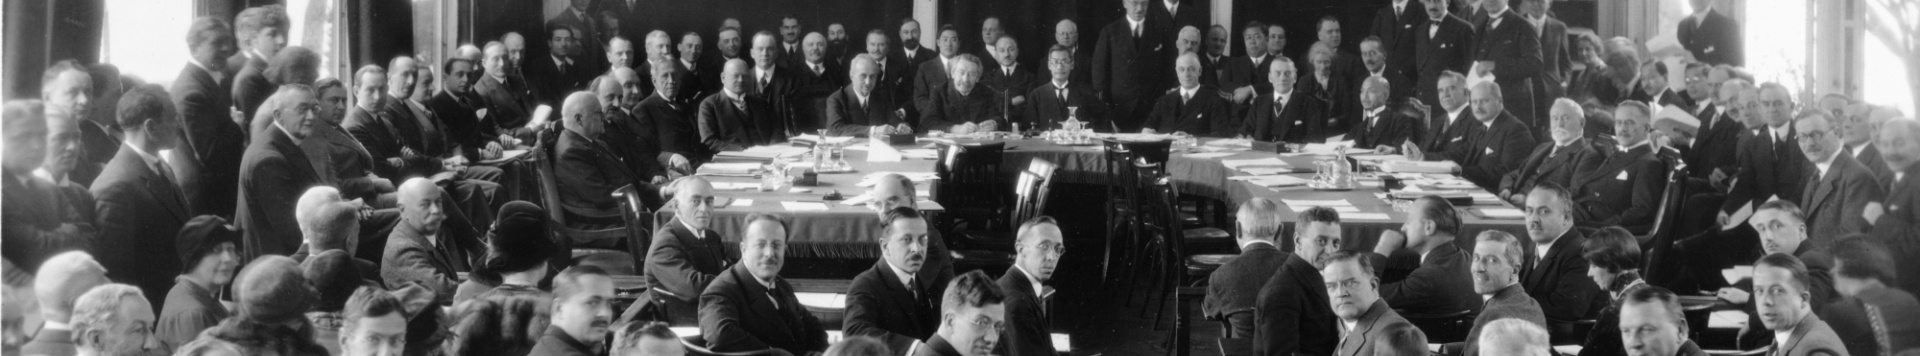 A black and white photography of the League of Nations Council: Three rows of delegate are gathered around a large table, all looking towards the camera. 